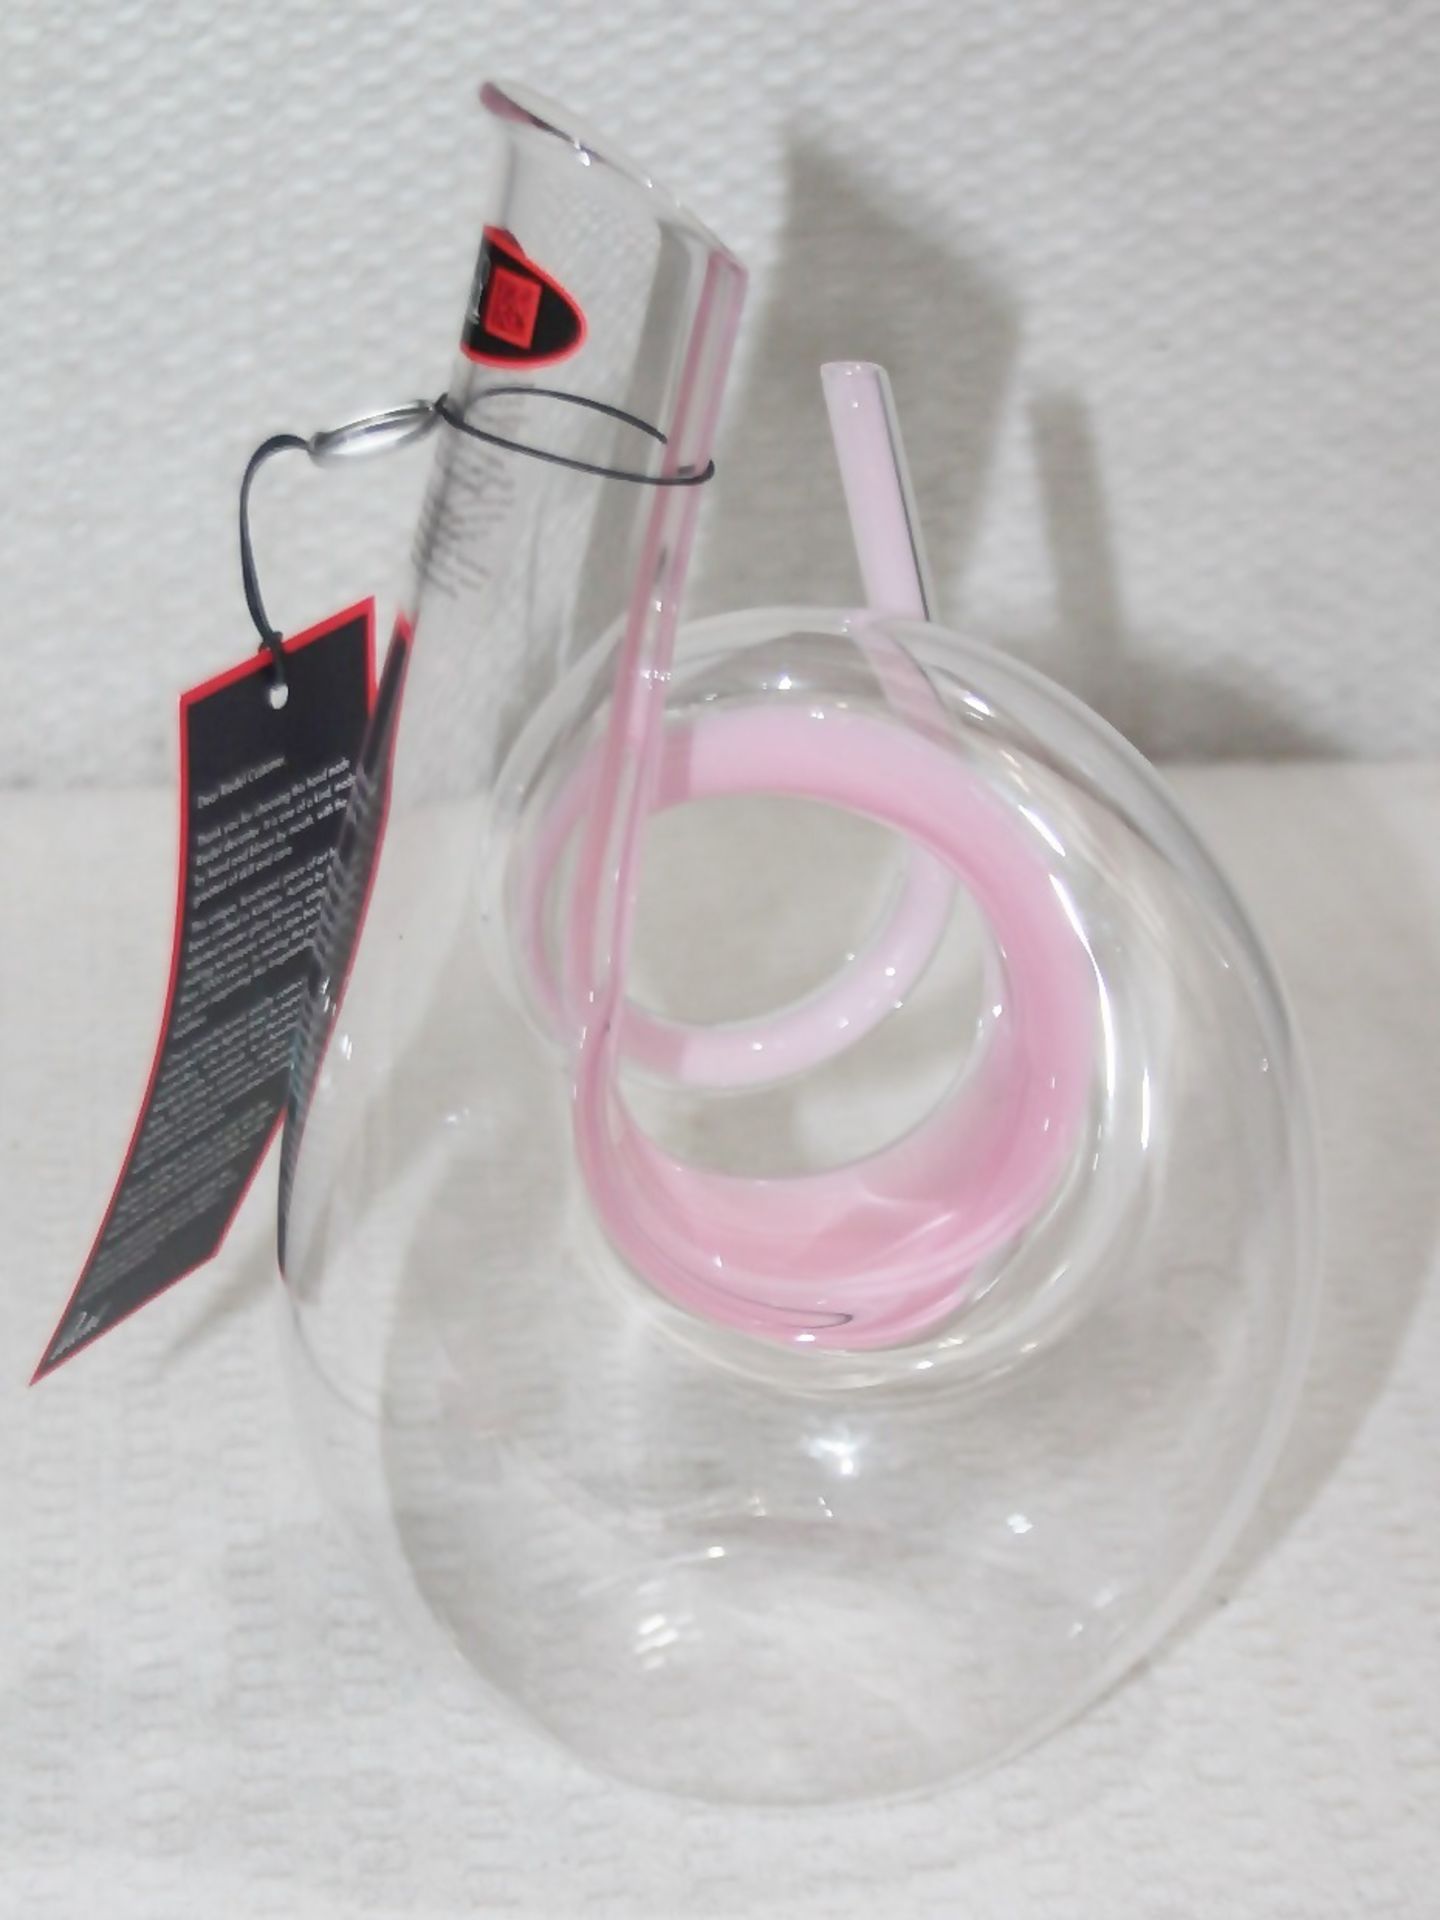 1 x RIEDEL 'Pink Curly' Fine Crystal Artisan Decanter - Dimensions: H26.5cm - Original Price £325.00 - Image 2 of 7